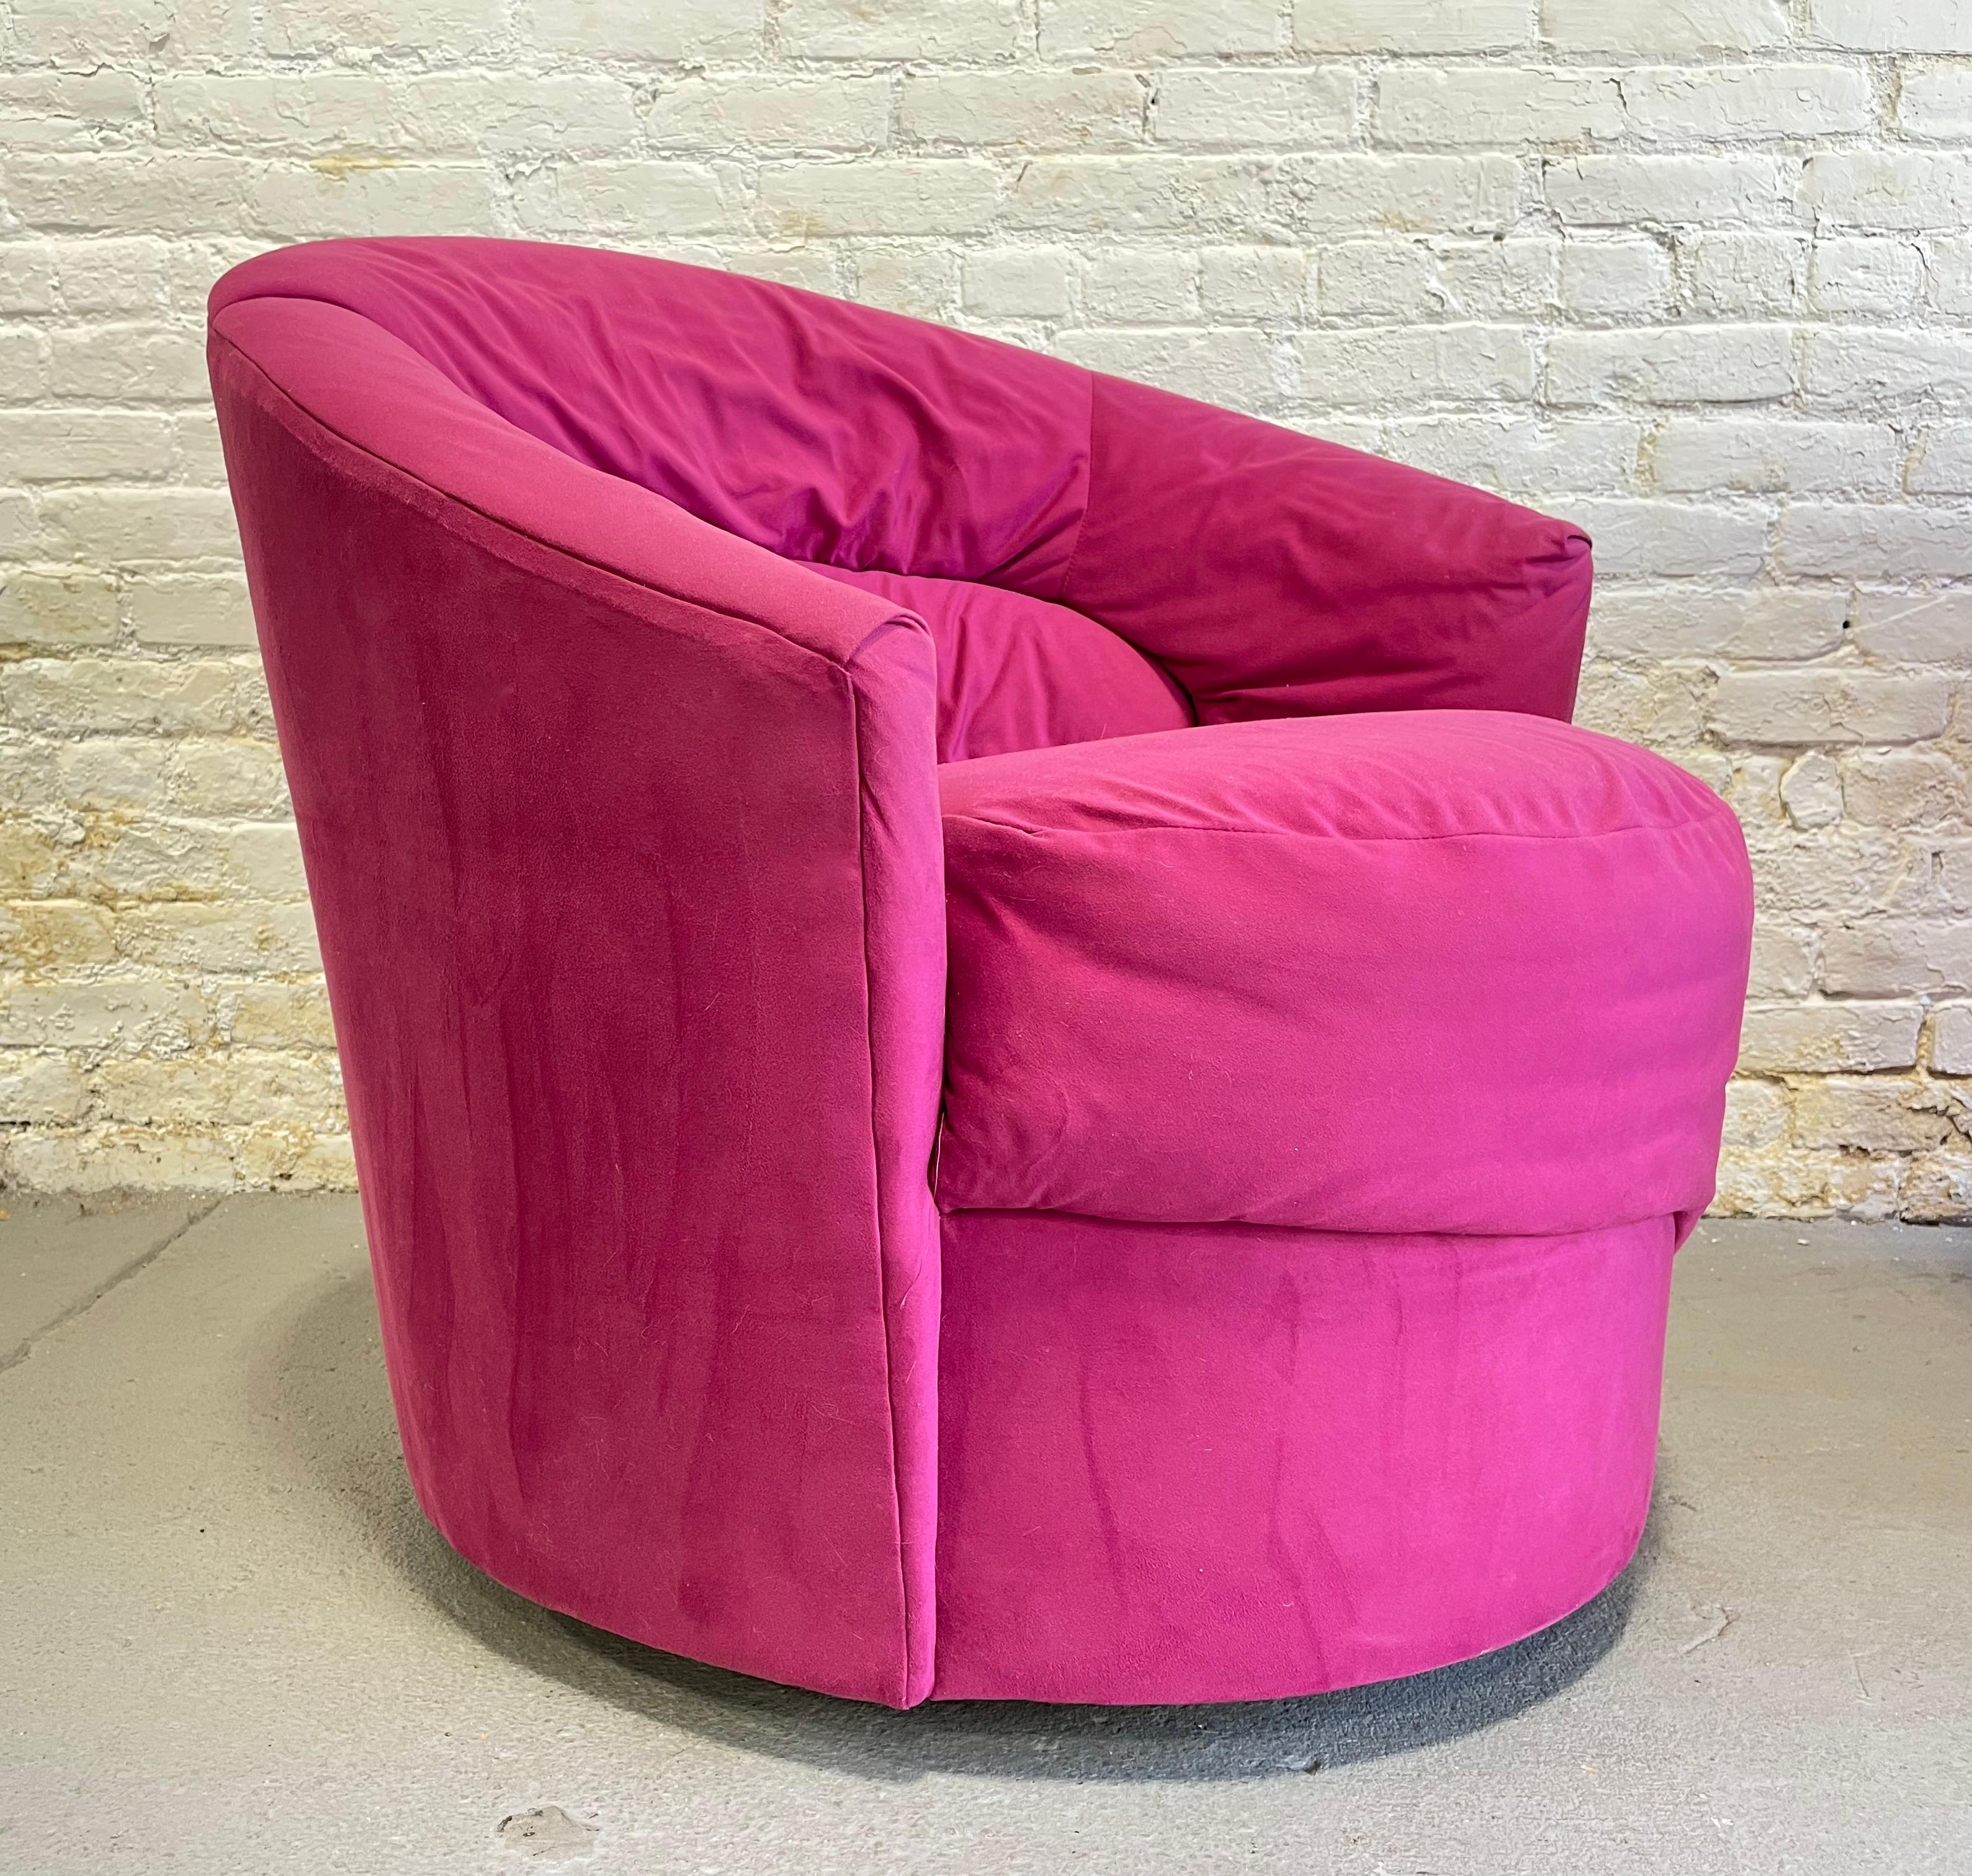 Late 20th Century Pink Postmodern Swivel Lounge Chair / Armchair, circa 1980s For Sale